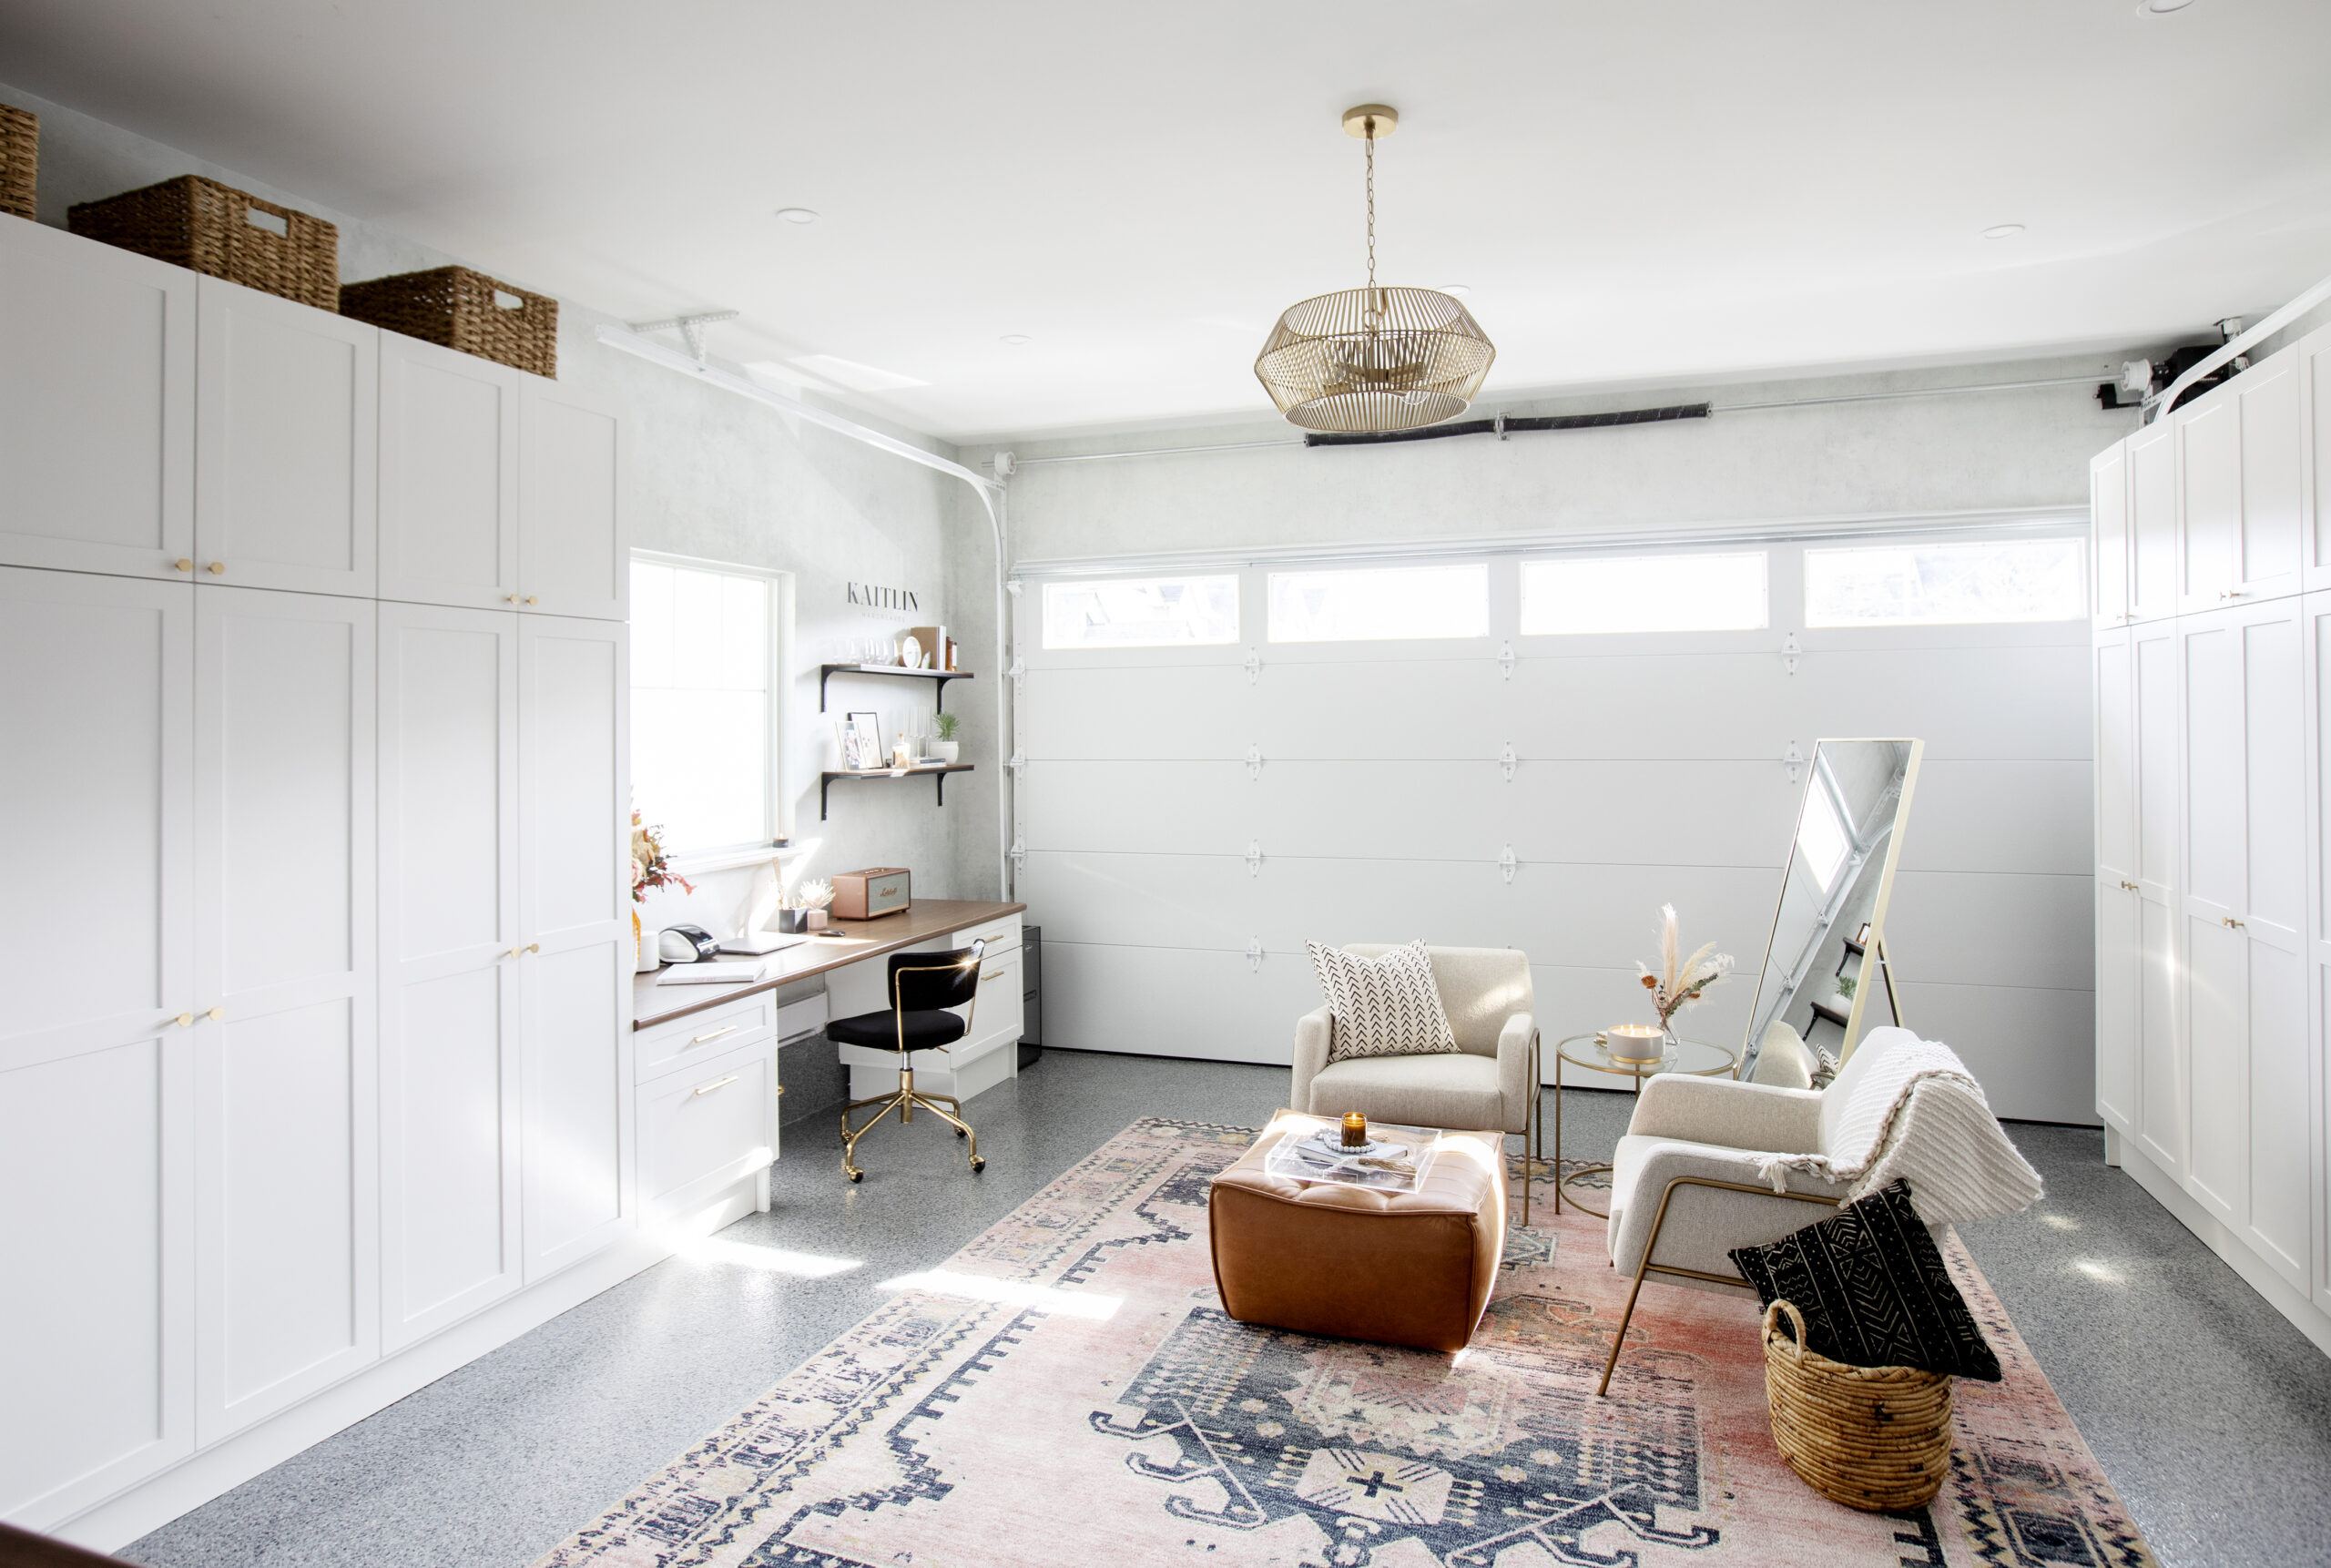 A Beautiful Garage Renovation with Kaitlin Hargreaves